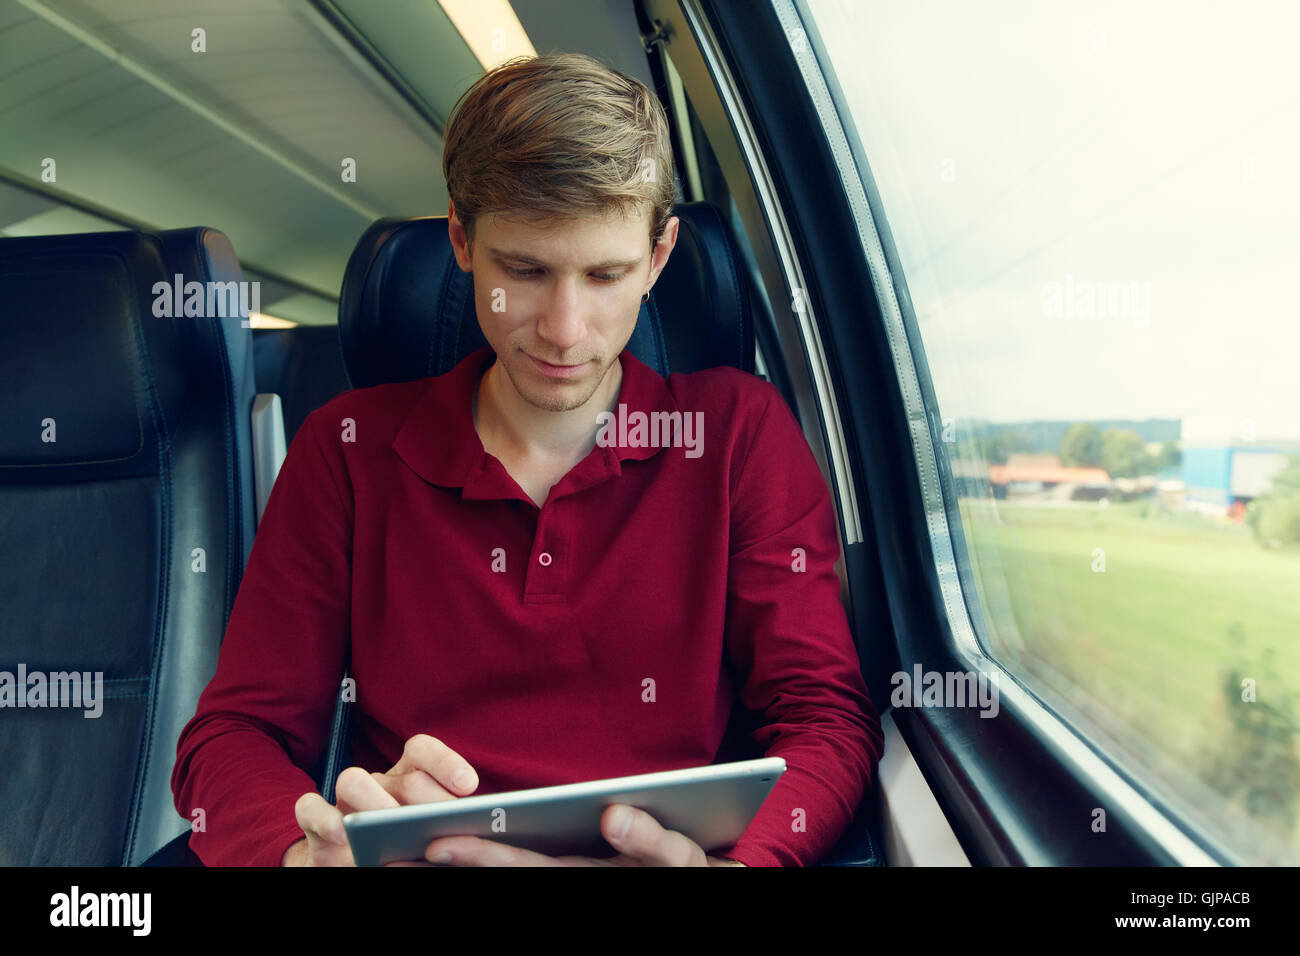 handsome man riding on a train Stock Photo